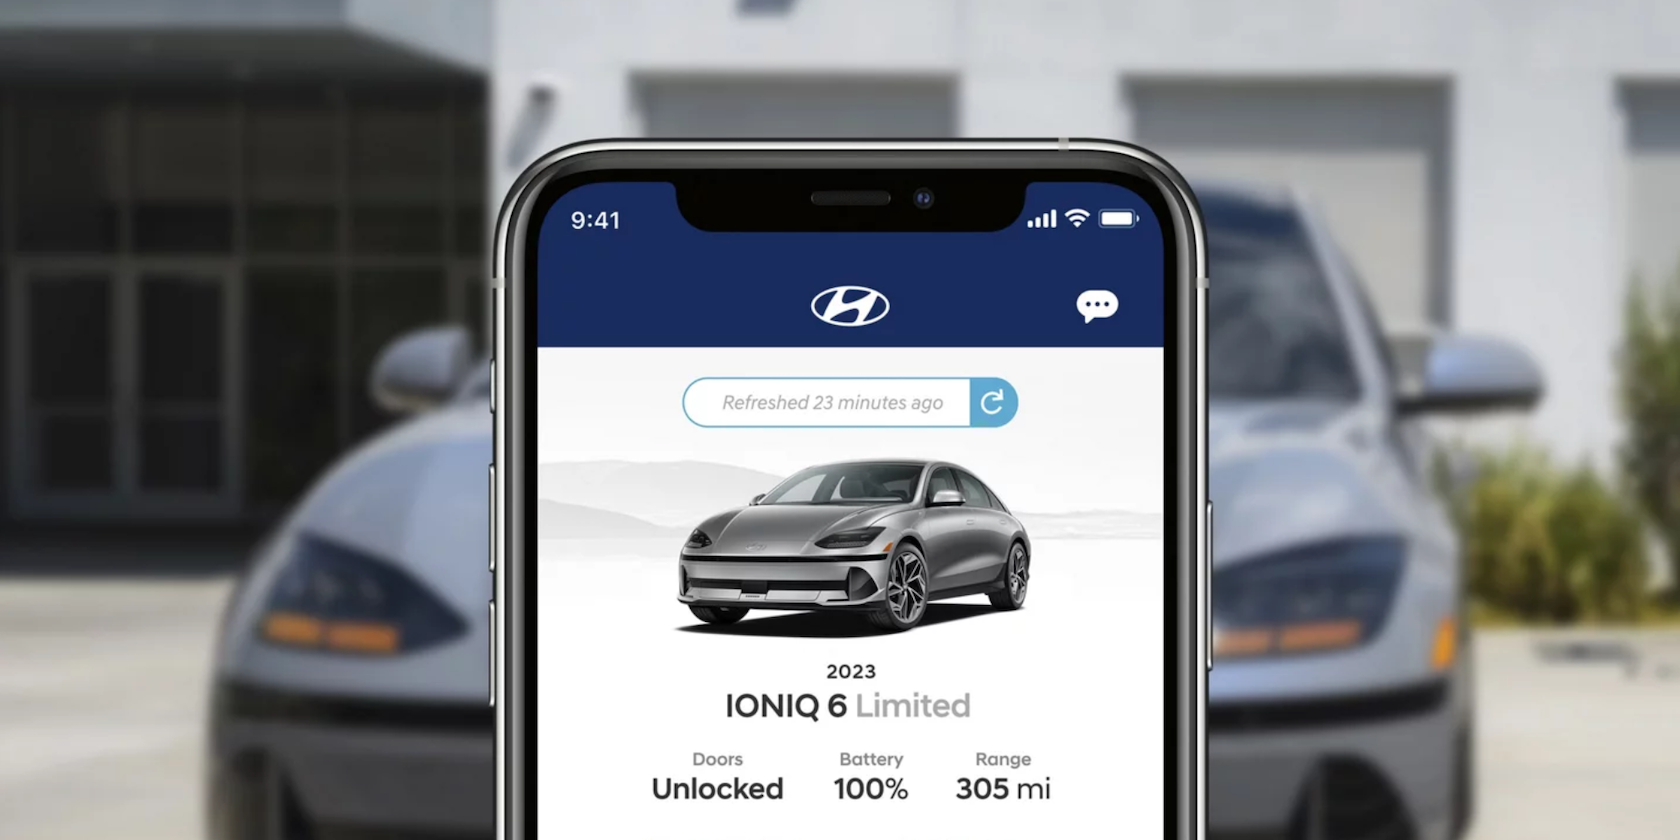 Hyundai Bluelink app being shown on mobile phone, with Ioniq 6 car in the back